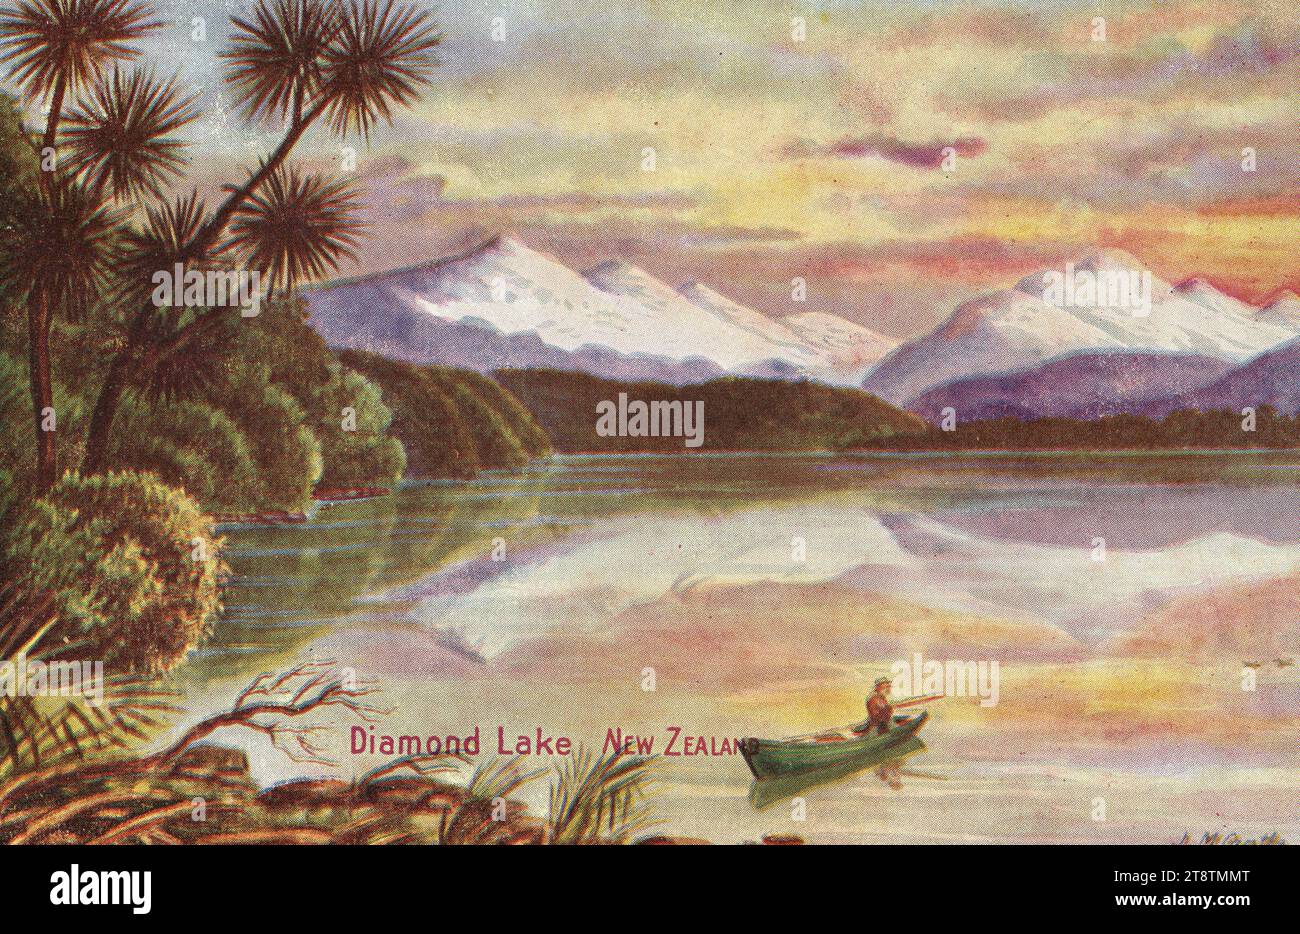 Cantle, J M, fl 1900s: Diamond Lake, New Zealand, 1905-1930? Postcard, Shows a view of a rowing boat on a lake at evening, with snowy mountains, a red sky, and cabbage trees in the left foreground Stock Photo